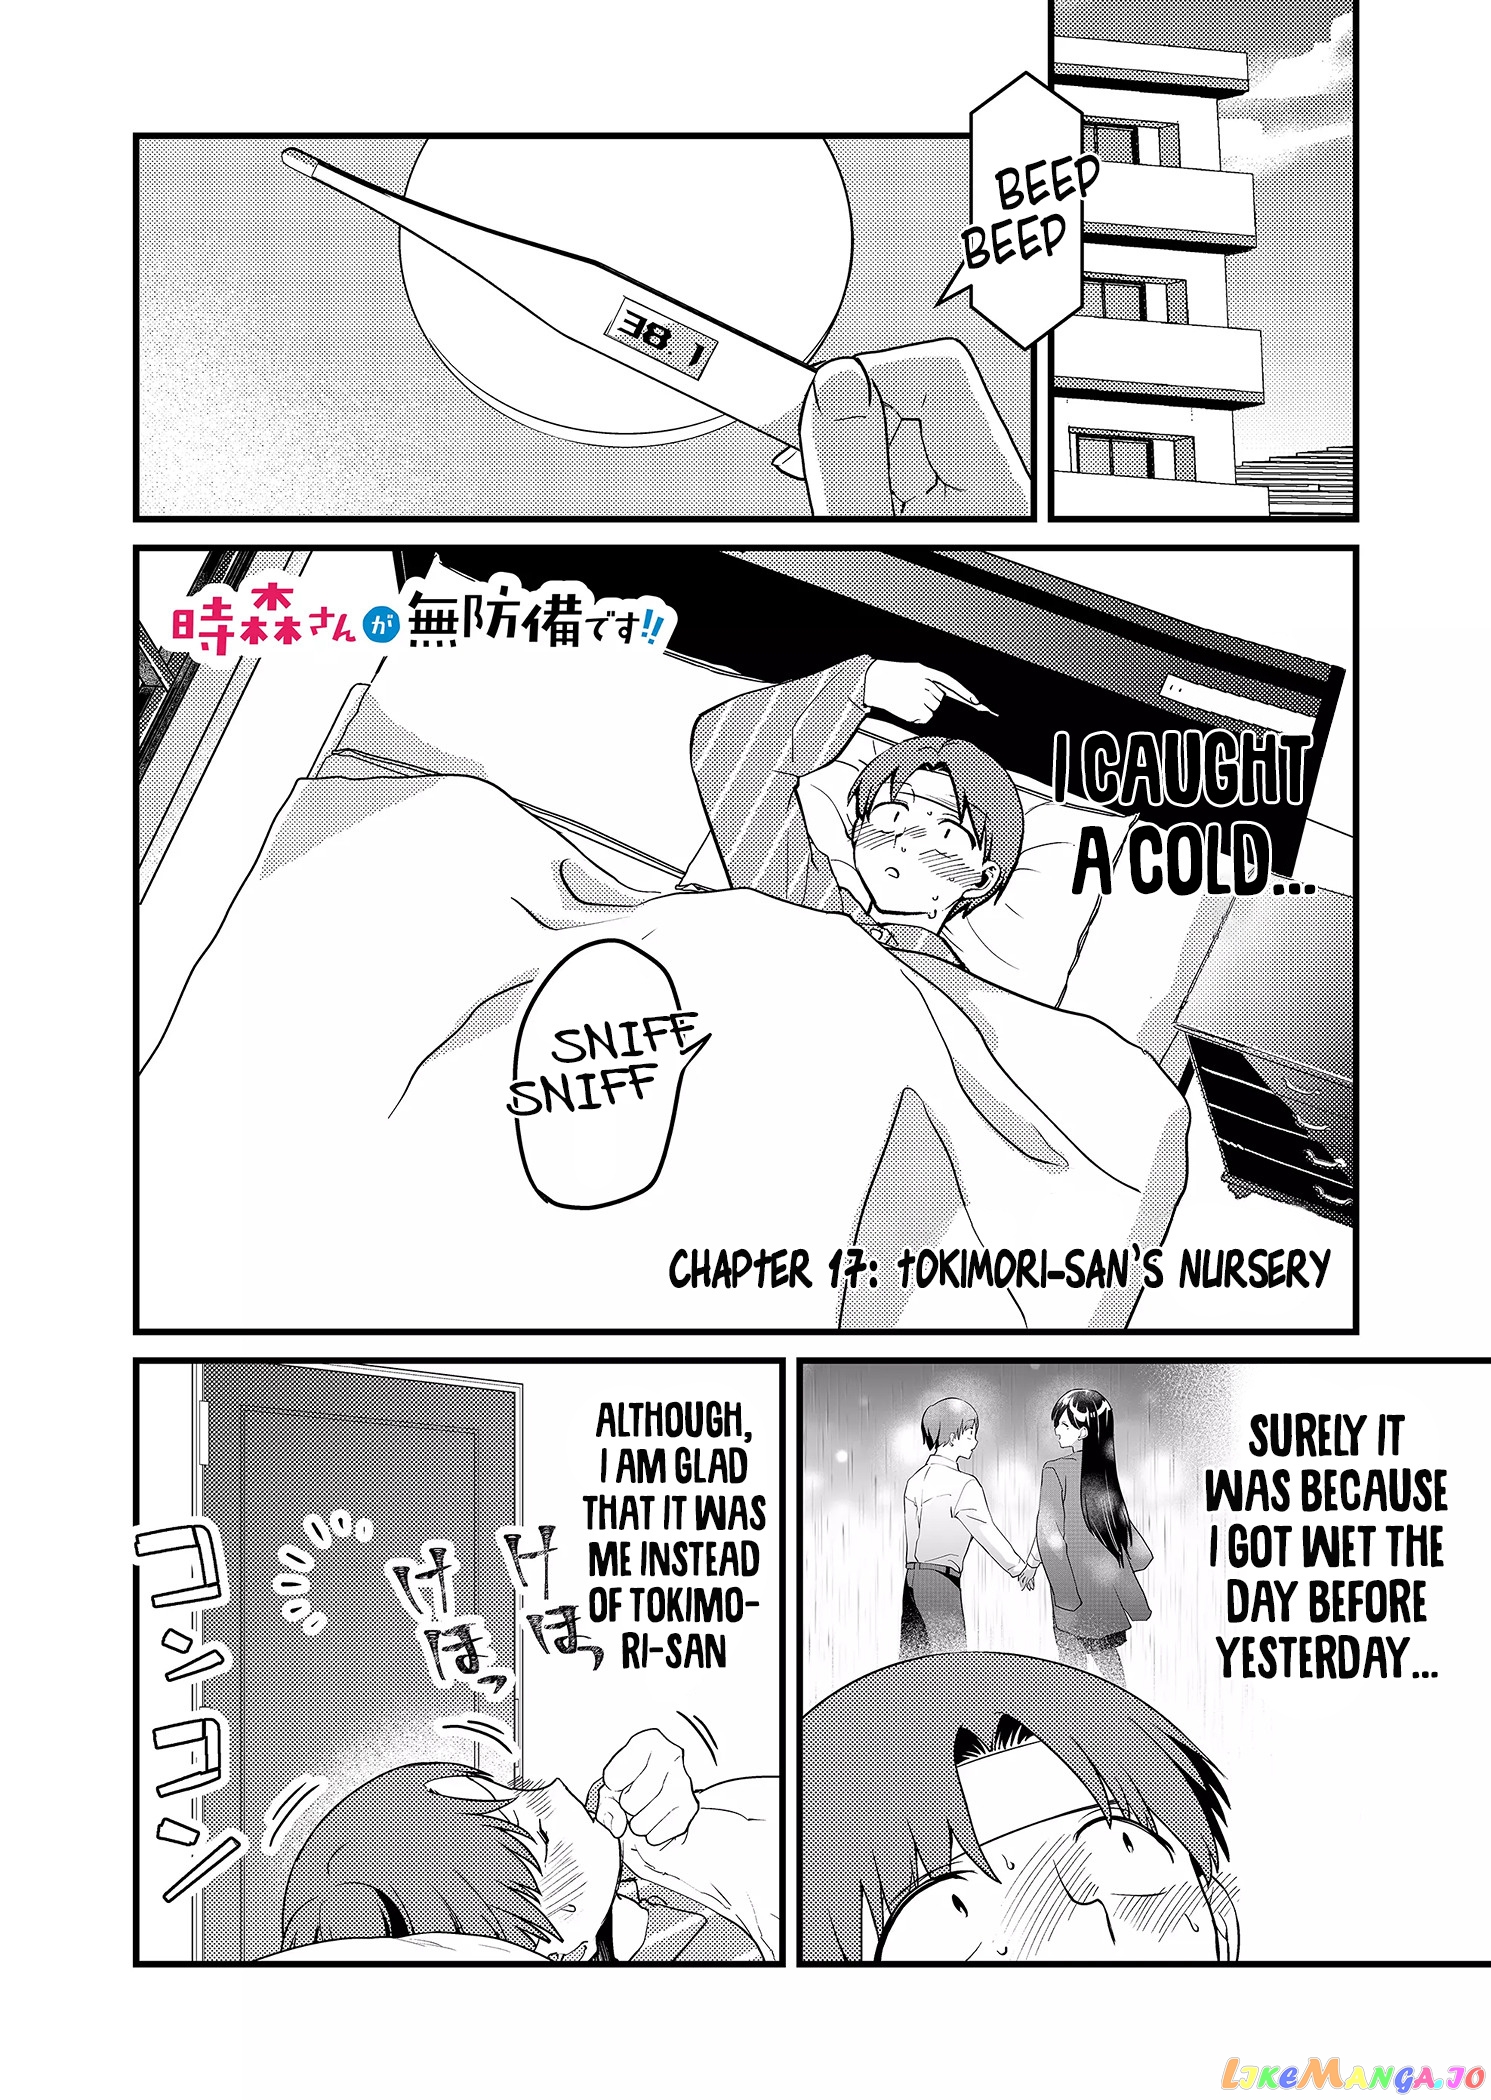 Tokimori-san Is Completely Defenseless!! chapter 17 - page 2